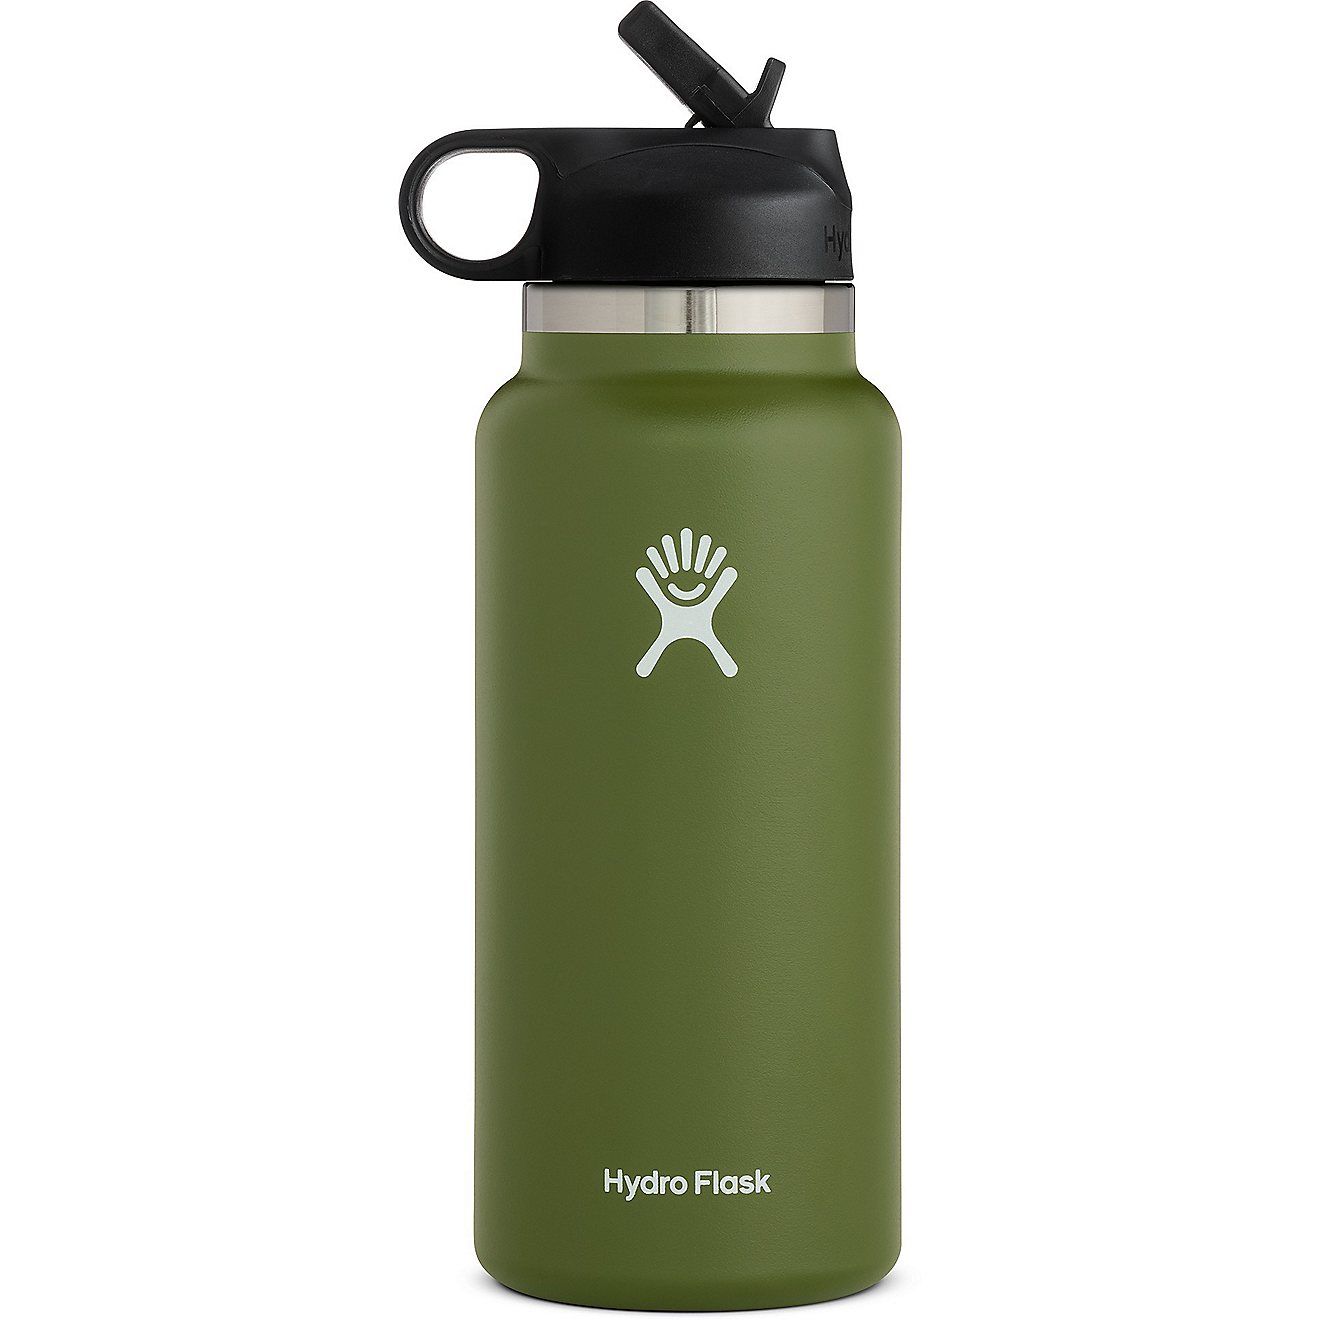 Hydro Flask 32 oz Wide Mouth Bottle 2.0 with Straw Lid | Academy | Academy Sports + Outdoors